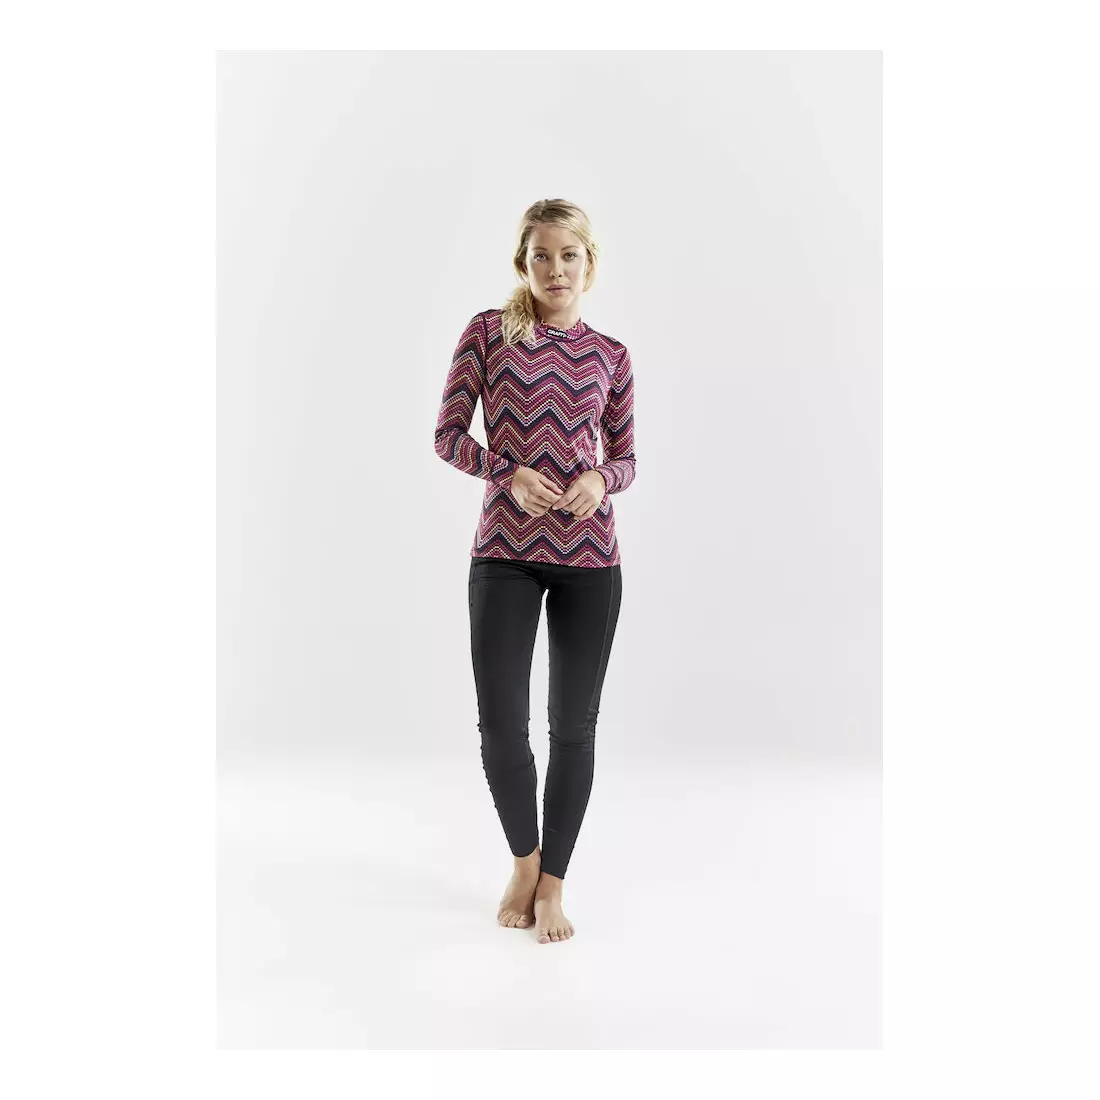 CRAFT MIX &amp; MATCH funktionelles Damen-Thermo-T-Shirt 1904508-1077